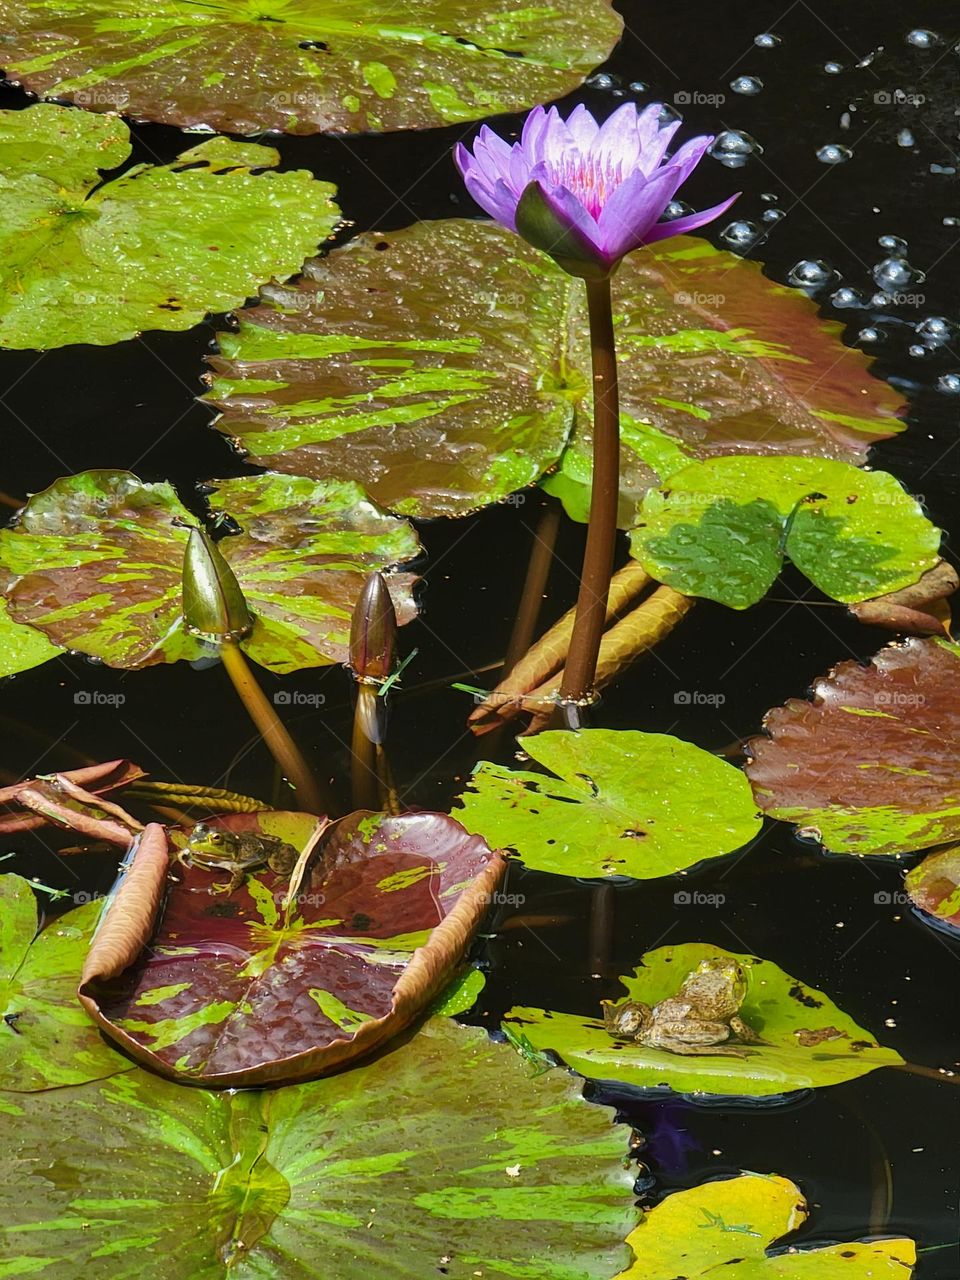 Cute Frog Sitting on a Lily Pad Under a Purple Flower